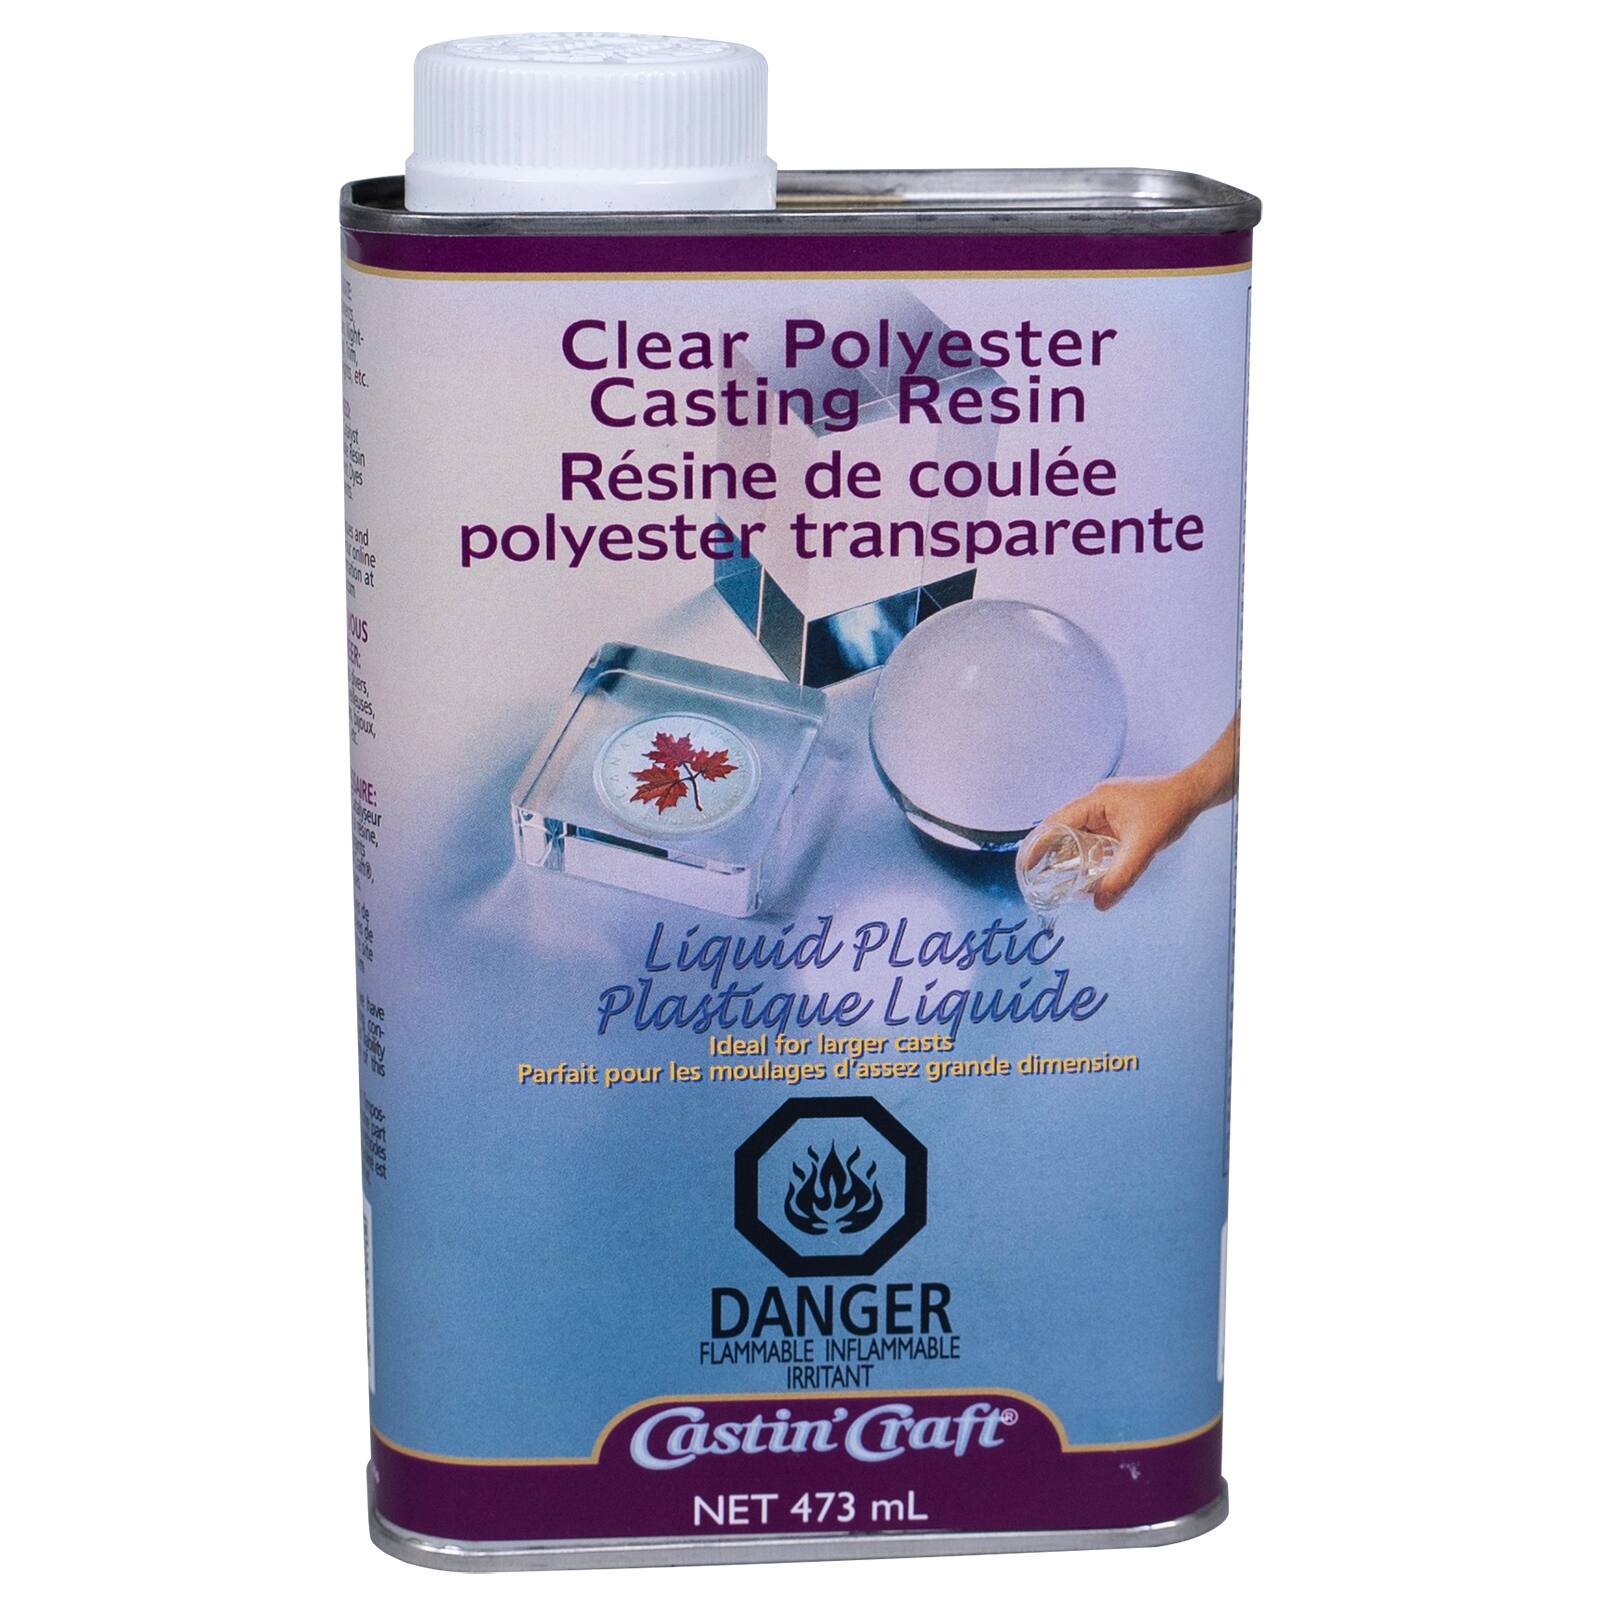 clear polyester casting resin canada